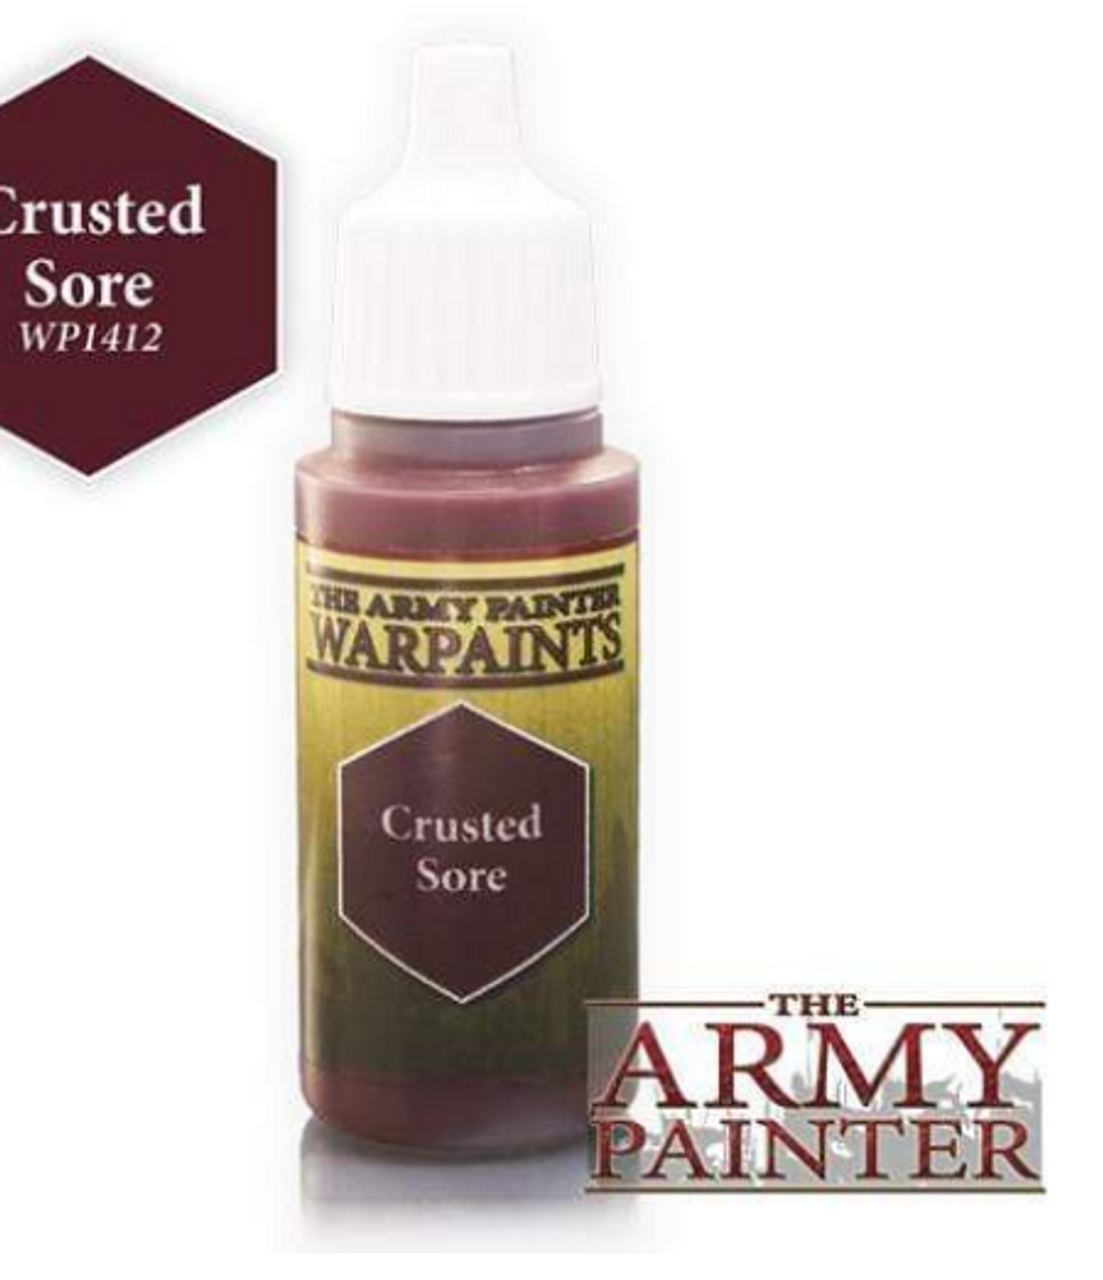 Army Painter Warpaint: Crusted Sore